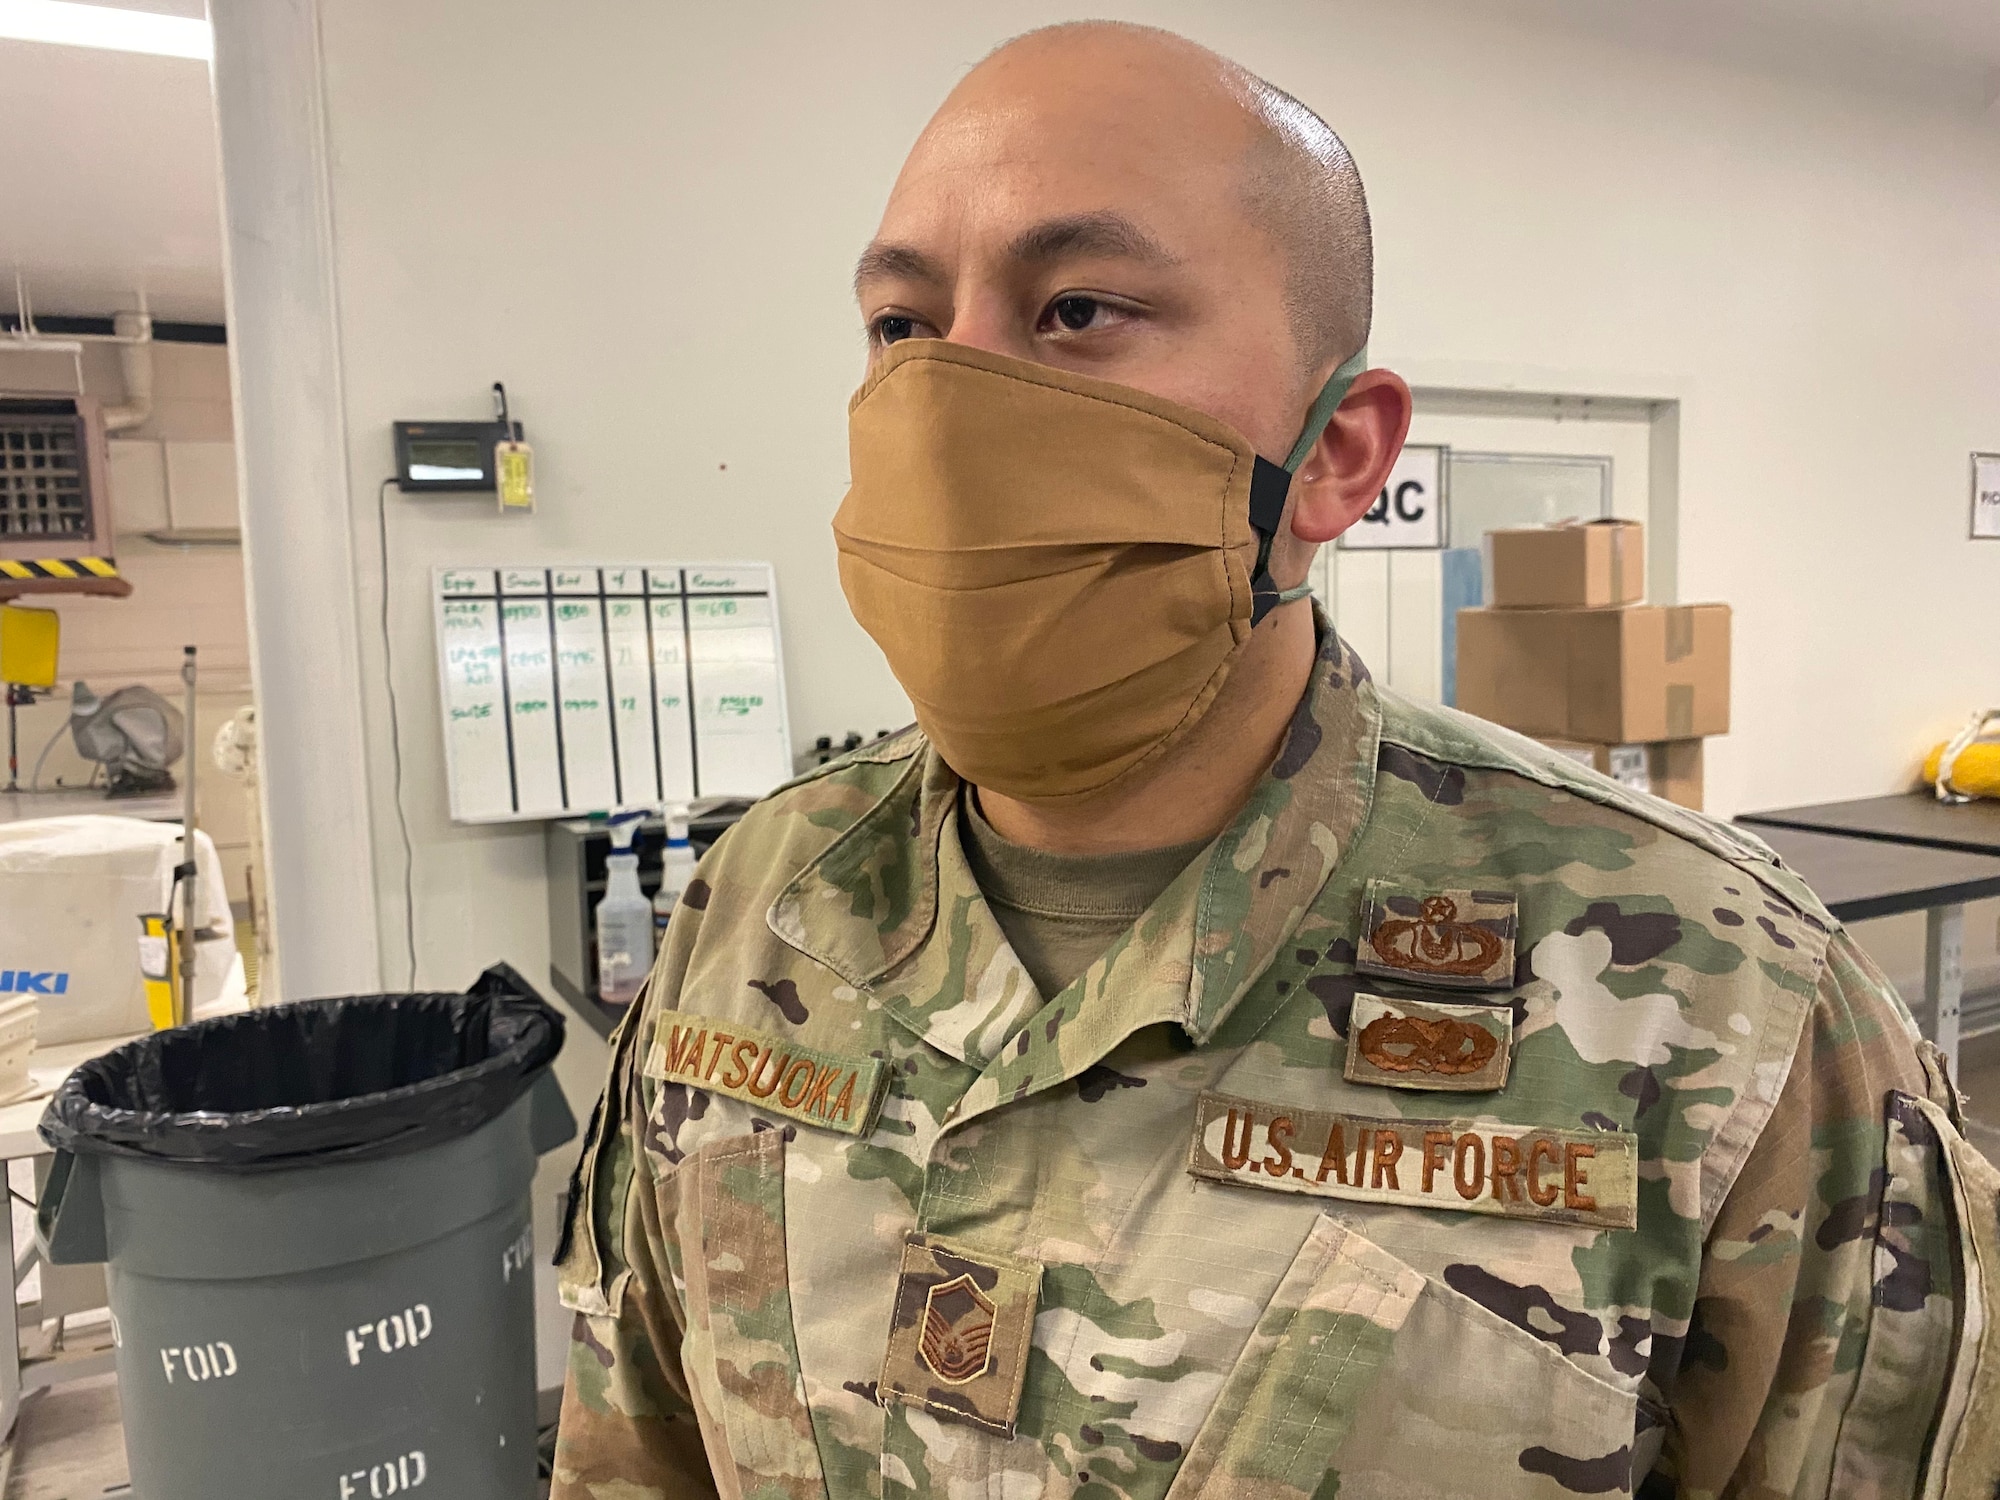 Master Sgt. Henry Matsuoka, section chief, air crew flight equipment, 412th Operations Support Squadron, 412th Operations Group, 412th Test Wing, demonstrates proper use of a mask that was fabricated using available equipment in the Air Crew Flight Equipment section at Edwards Air Force Base, April 7. Although cloth masks don’t offer full protection from COVID-19, the CDC advises that a simple cloth covering can slow the spread of the virus and help people who may have the virus and not know it from spreading it to others. (Courtesy photo)